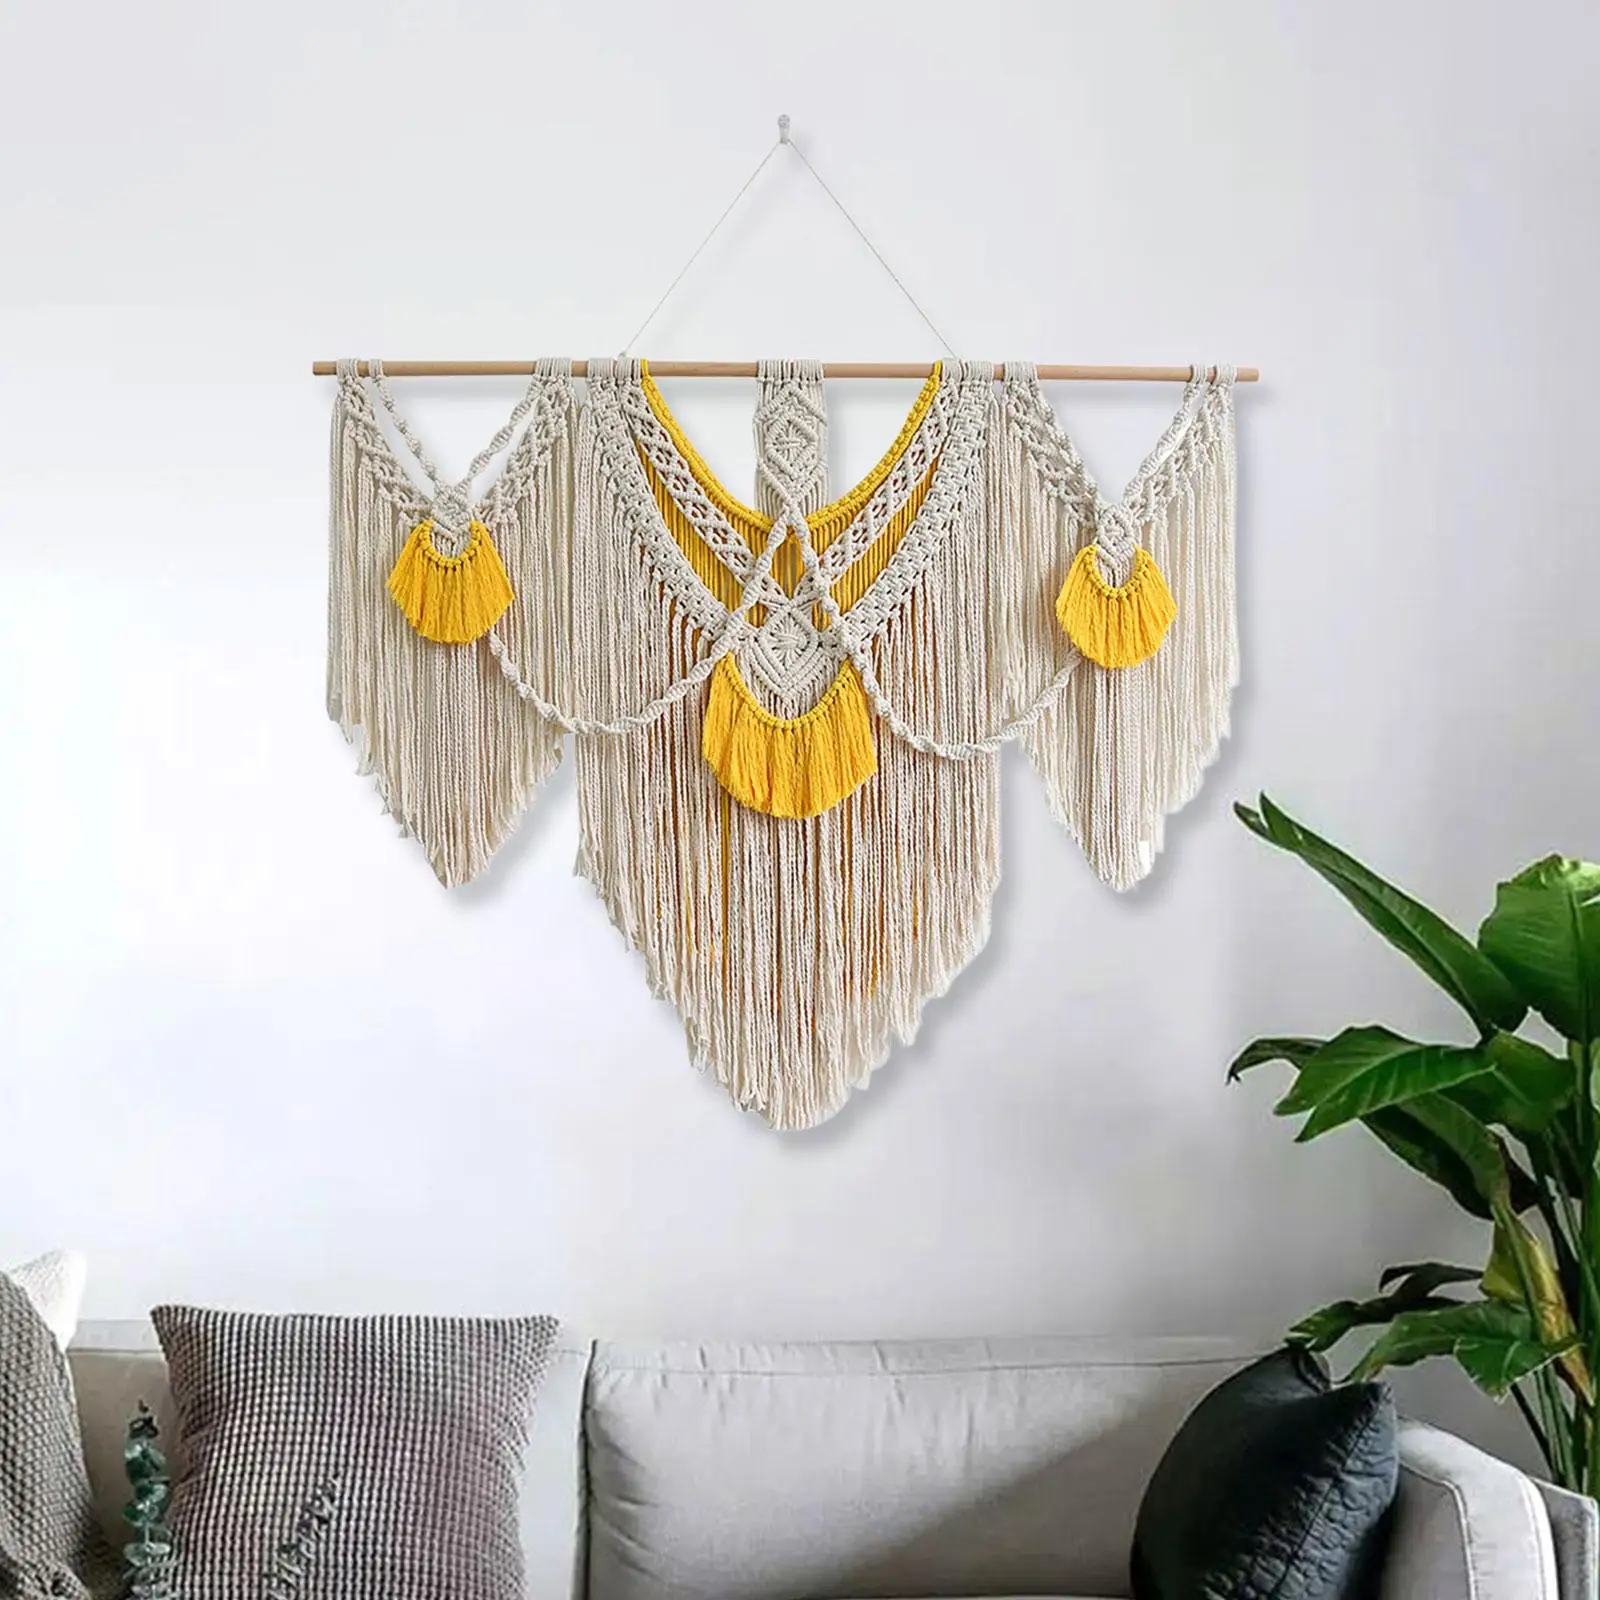 Wall Hanging Tapestry Modern Hanging Woven Tapestry Home Decor Wall Hanging Boho Tassels for Dorm Home Backdrop Wedding Holiday